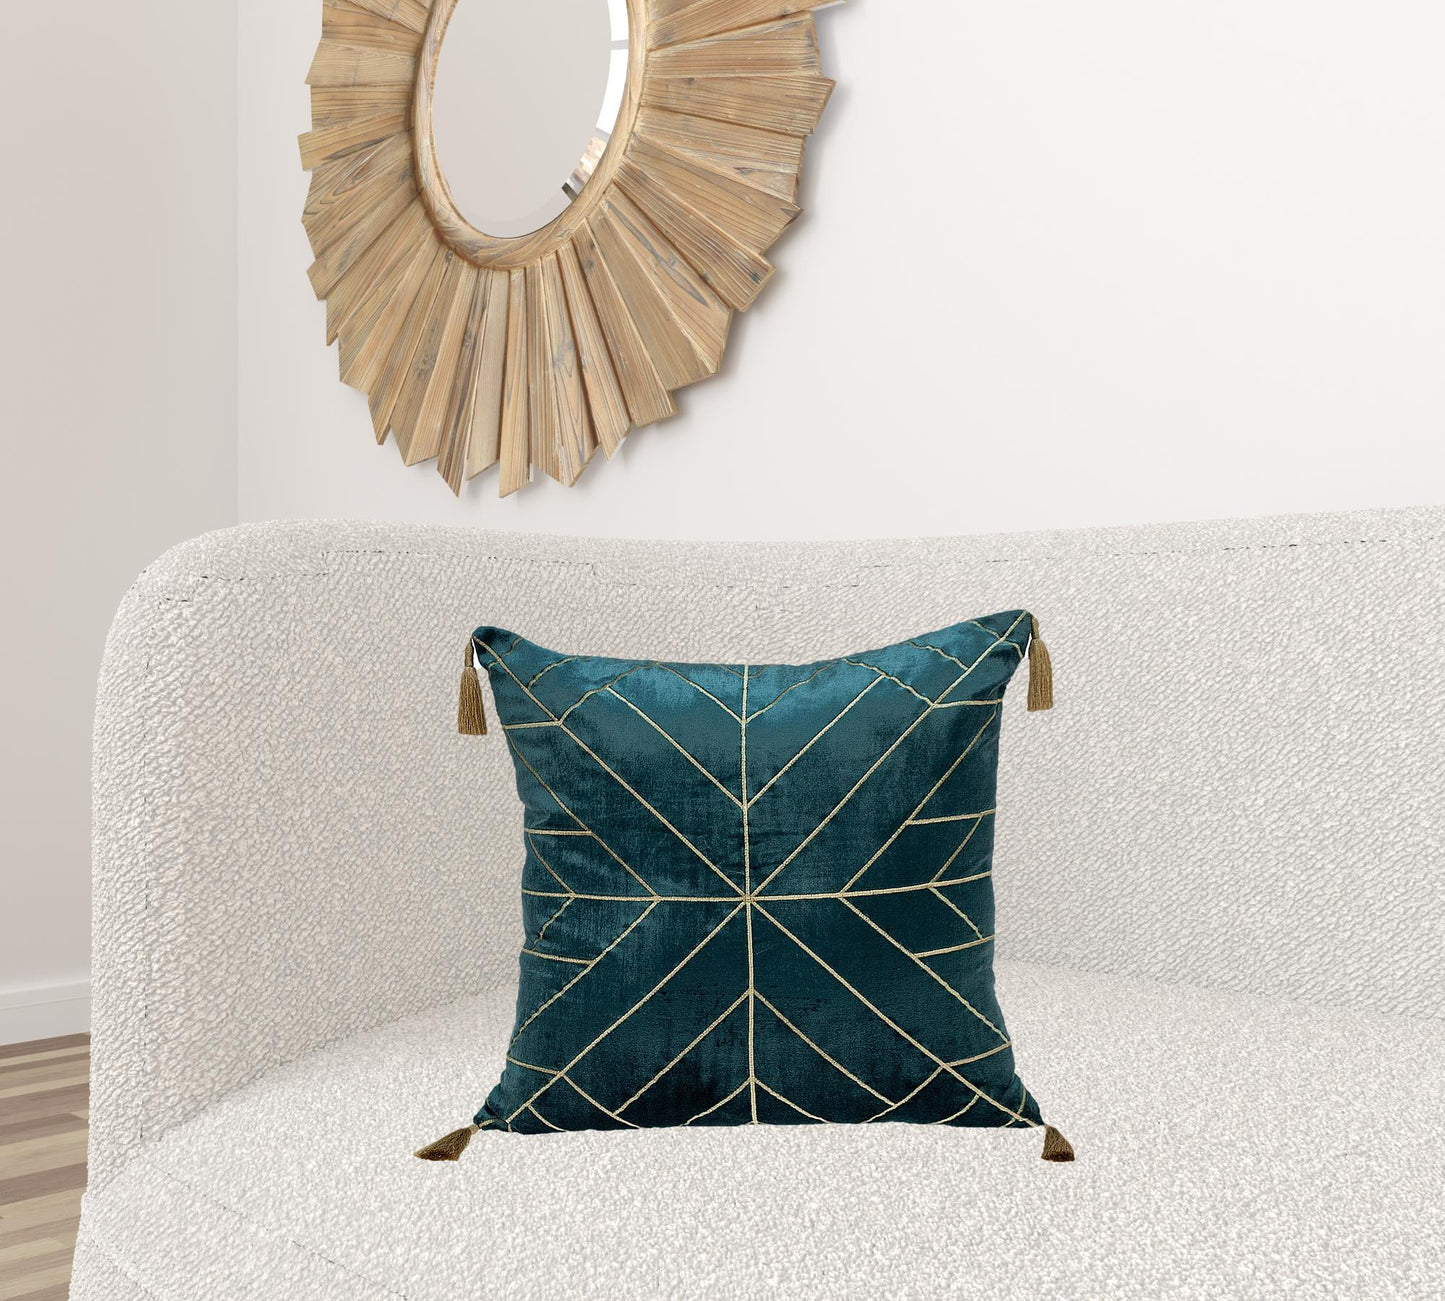 Teal and Gold Geo Velvet Throw Pillow with Gold Tassels